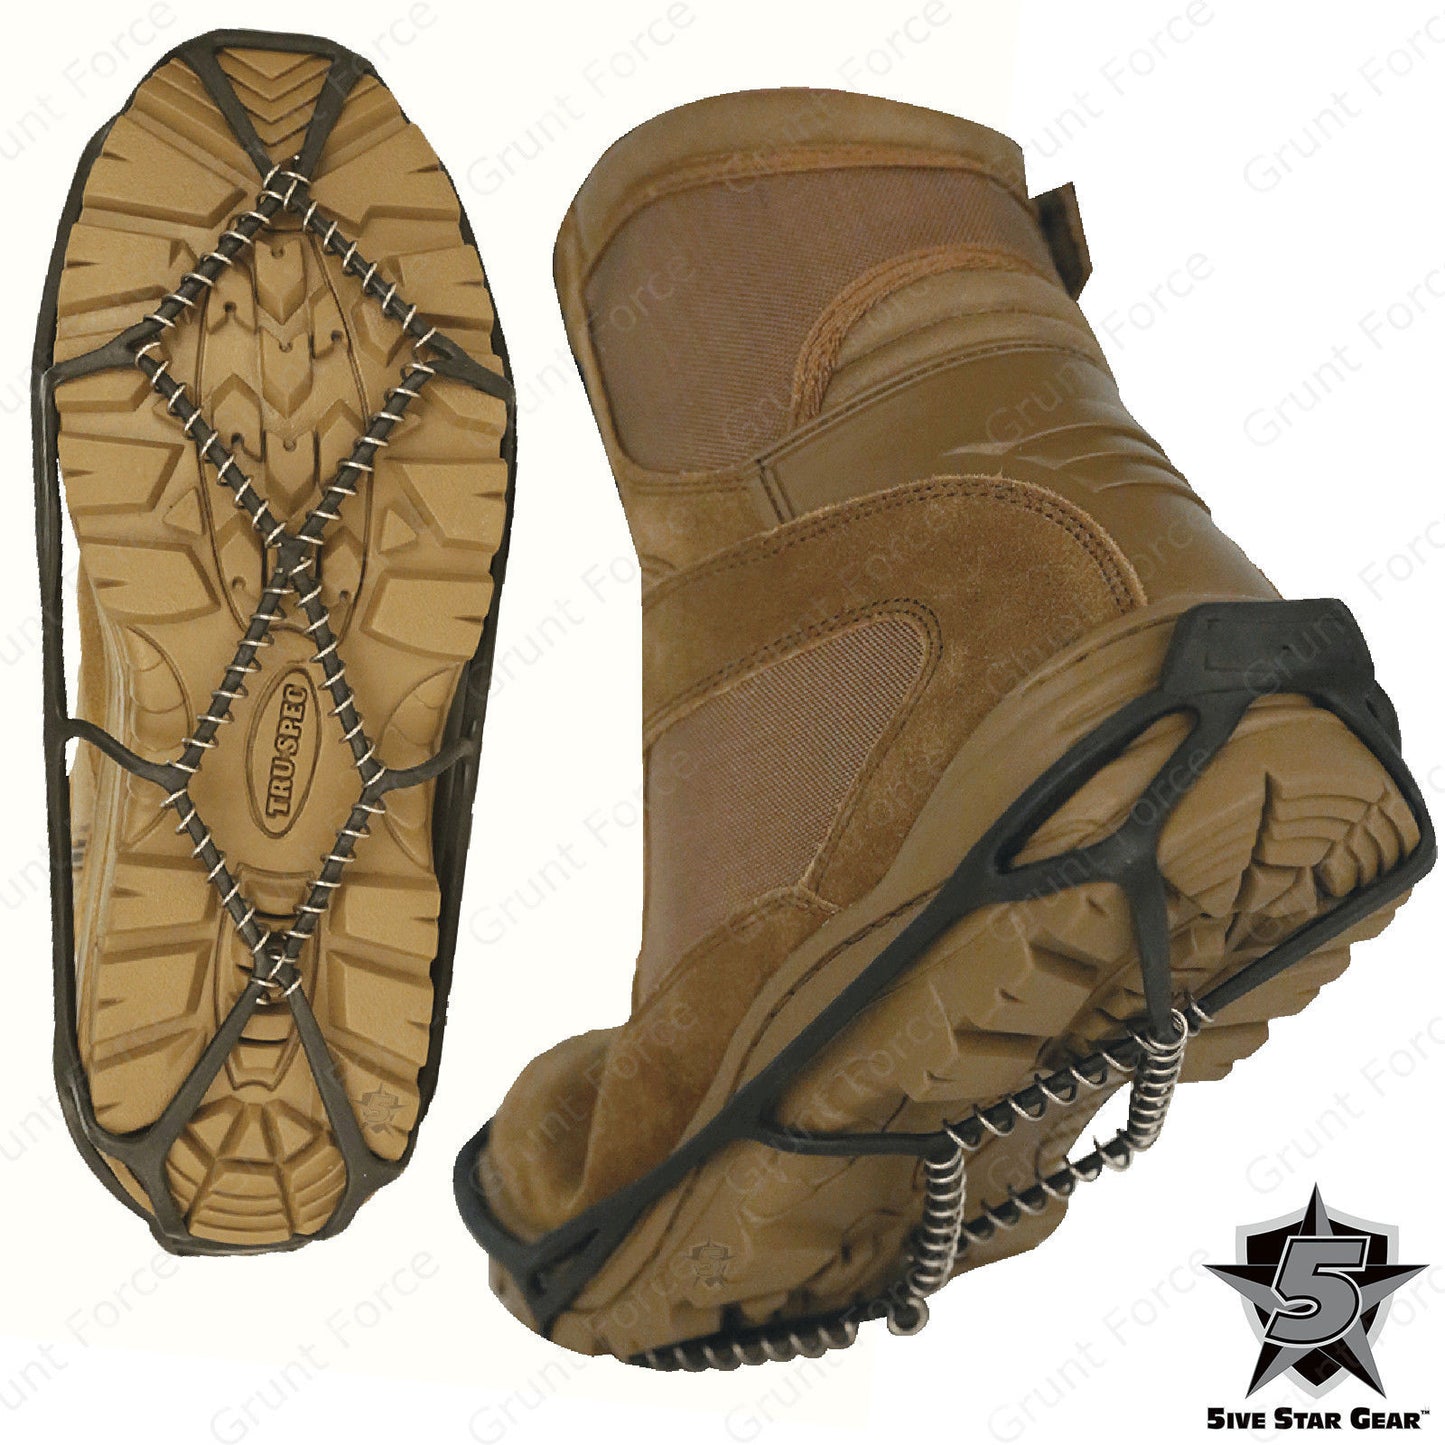 5ive Star Gear Tactical Ice Grip Boot Accessory - Helps Prevent Slips & Falls